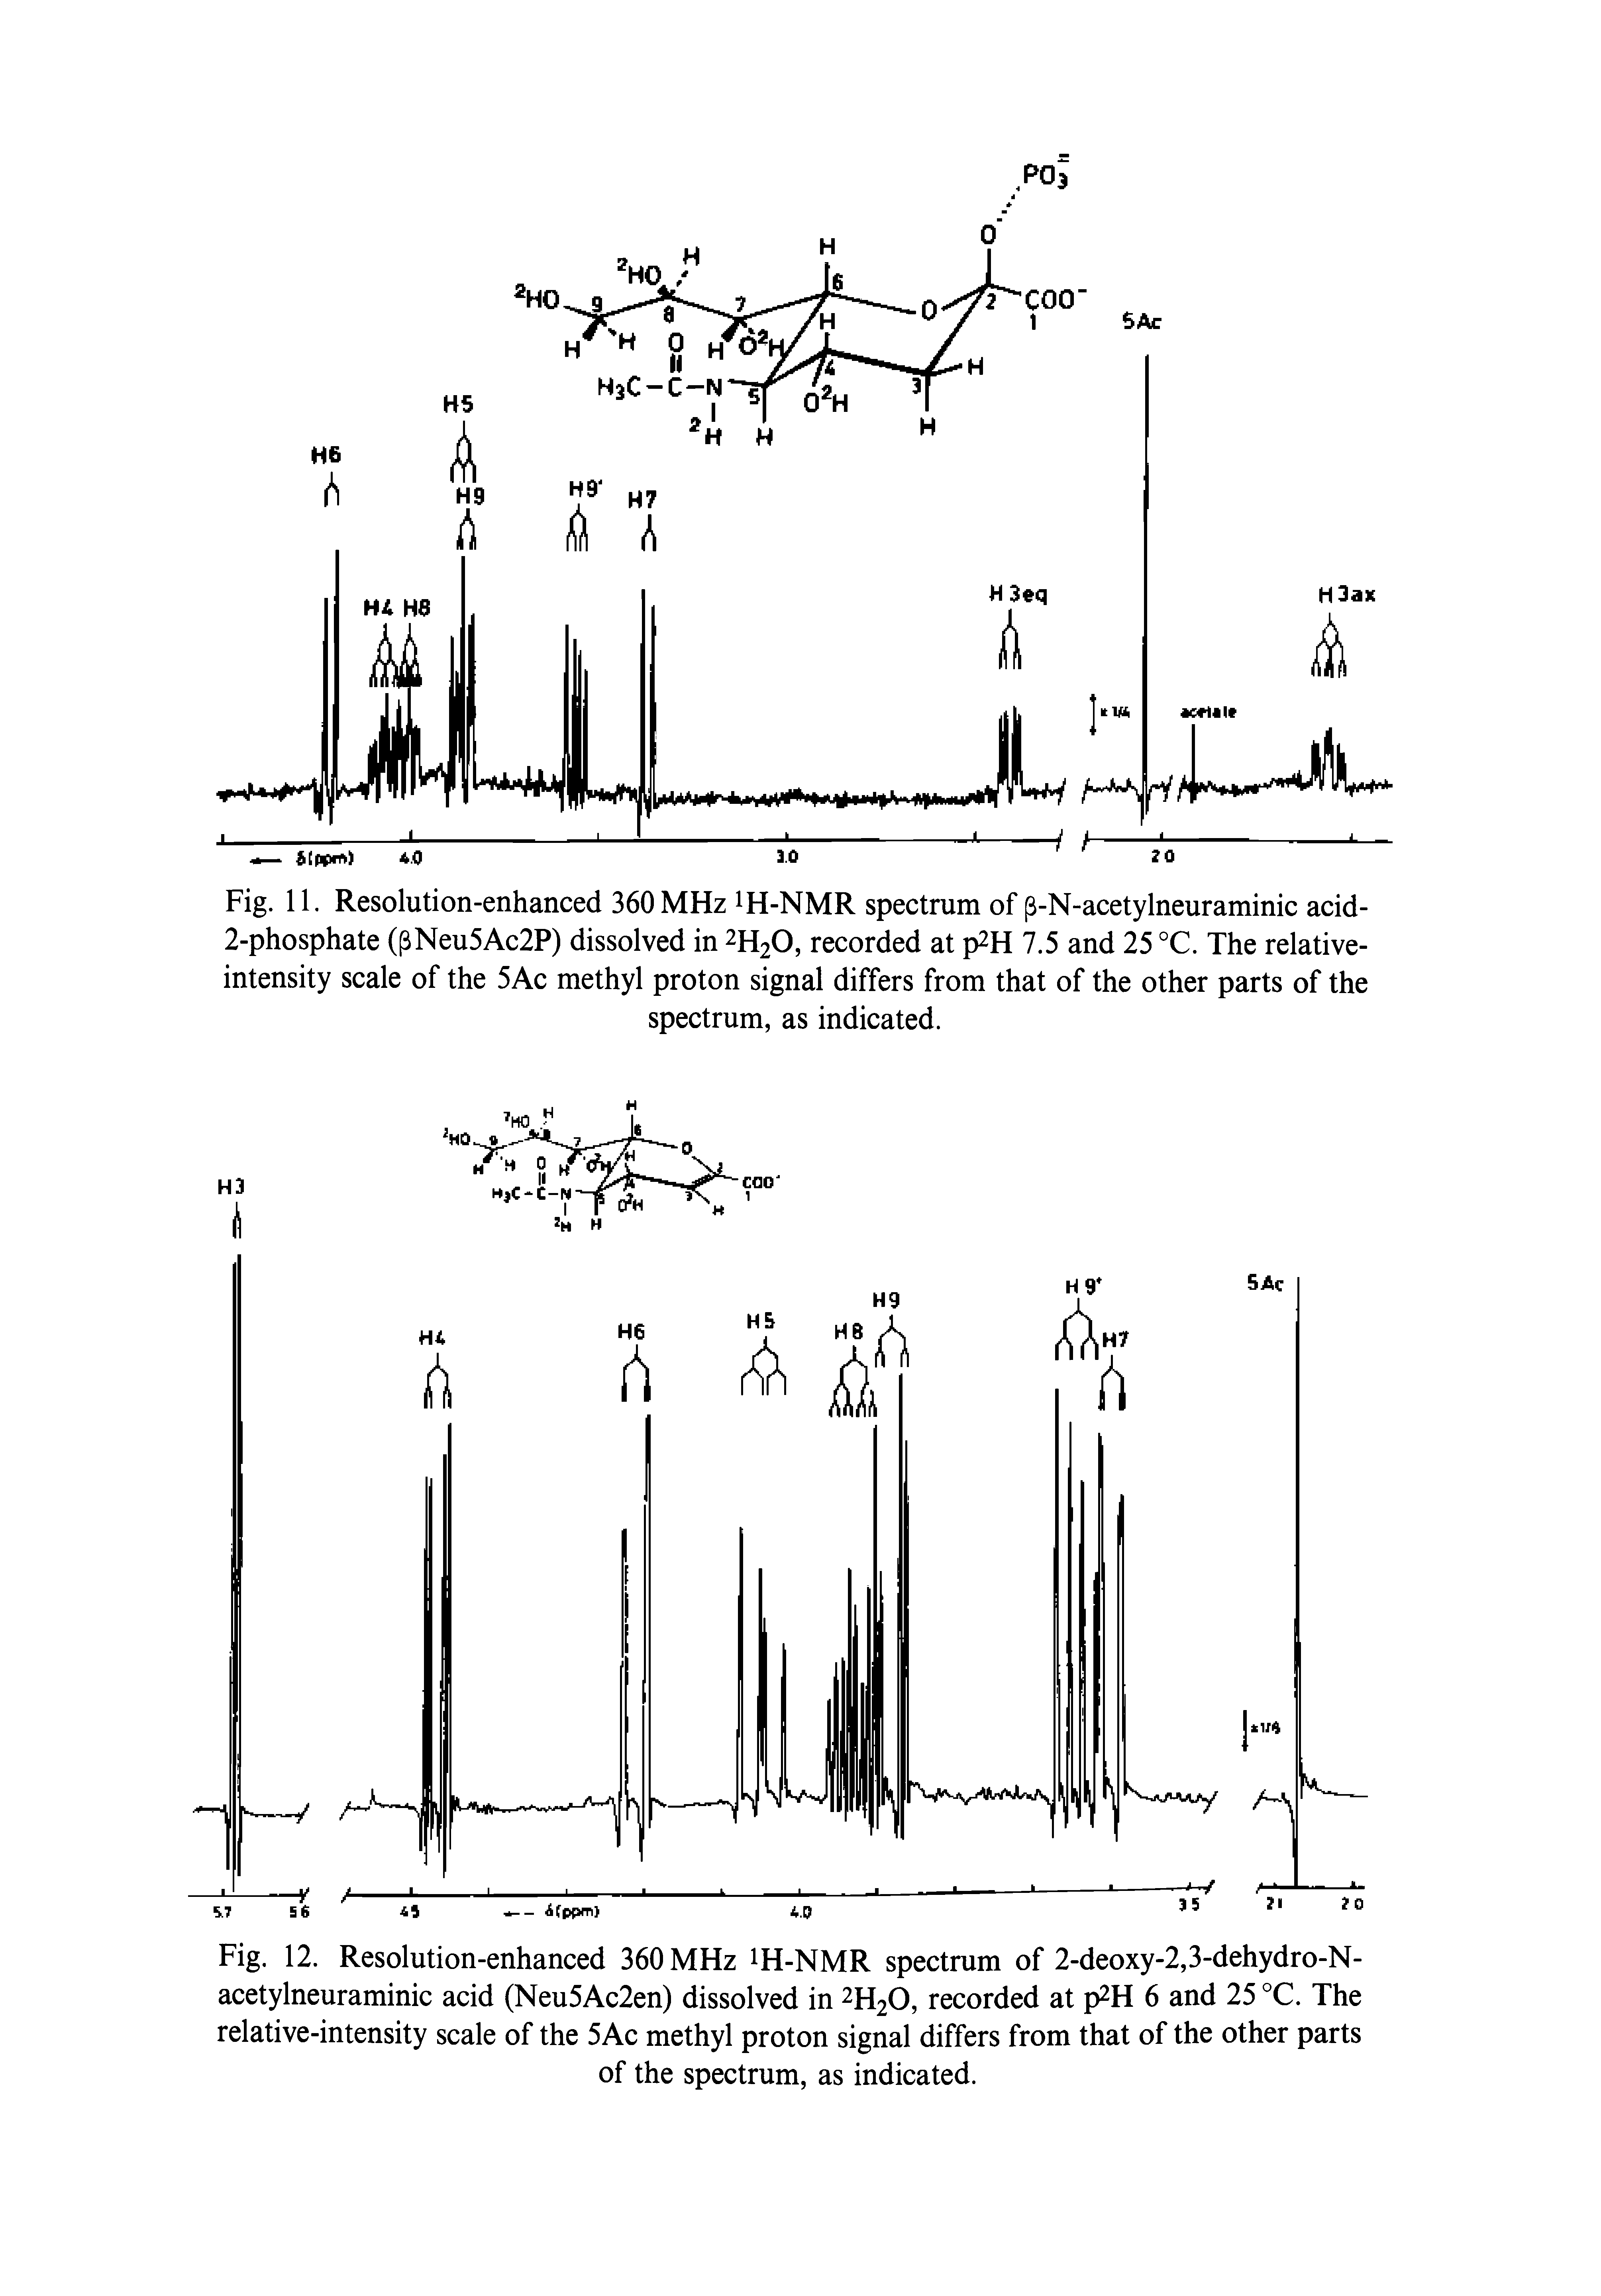 Fig. 12. Resolution-enhanced 360 MHz IH-NMR spectrum of 2-deoxy-2,3-dehydro-N-acetylneuraminic acid (Neu5Ac2en) dissolved in 2H2O, recorded at p H 6 and 25 C. The relative-intensity scale of the 5Ac methyl proton signal differs from that of the other parts...